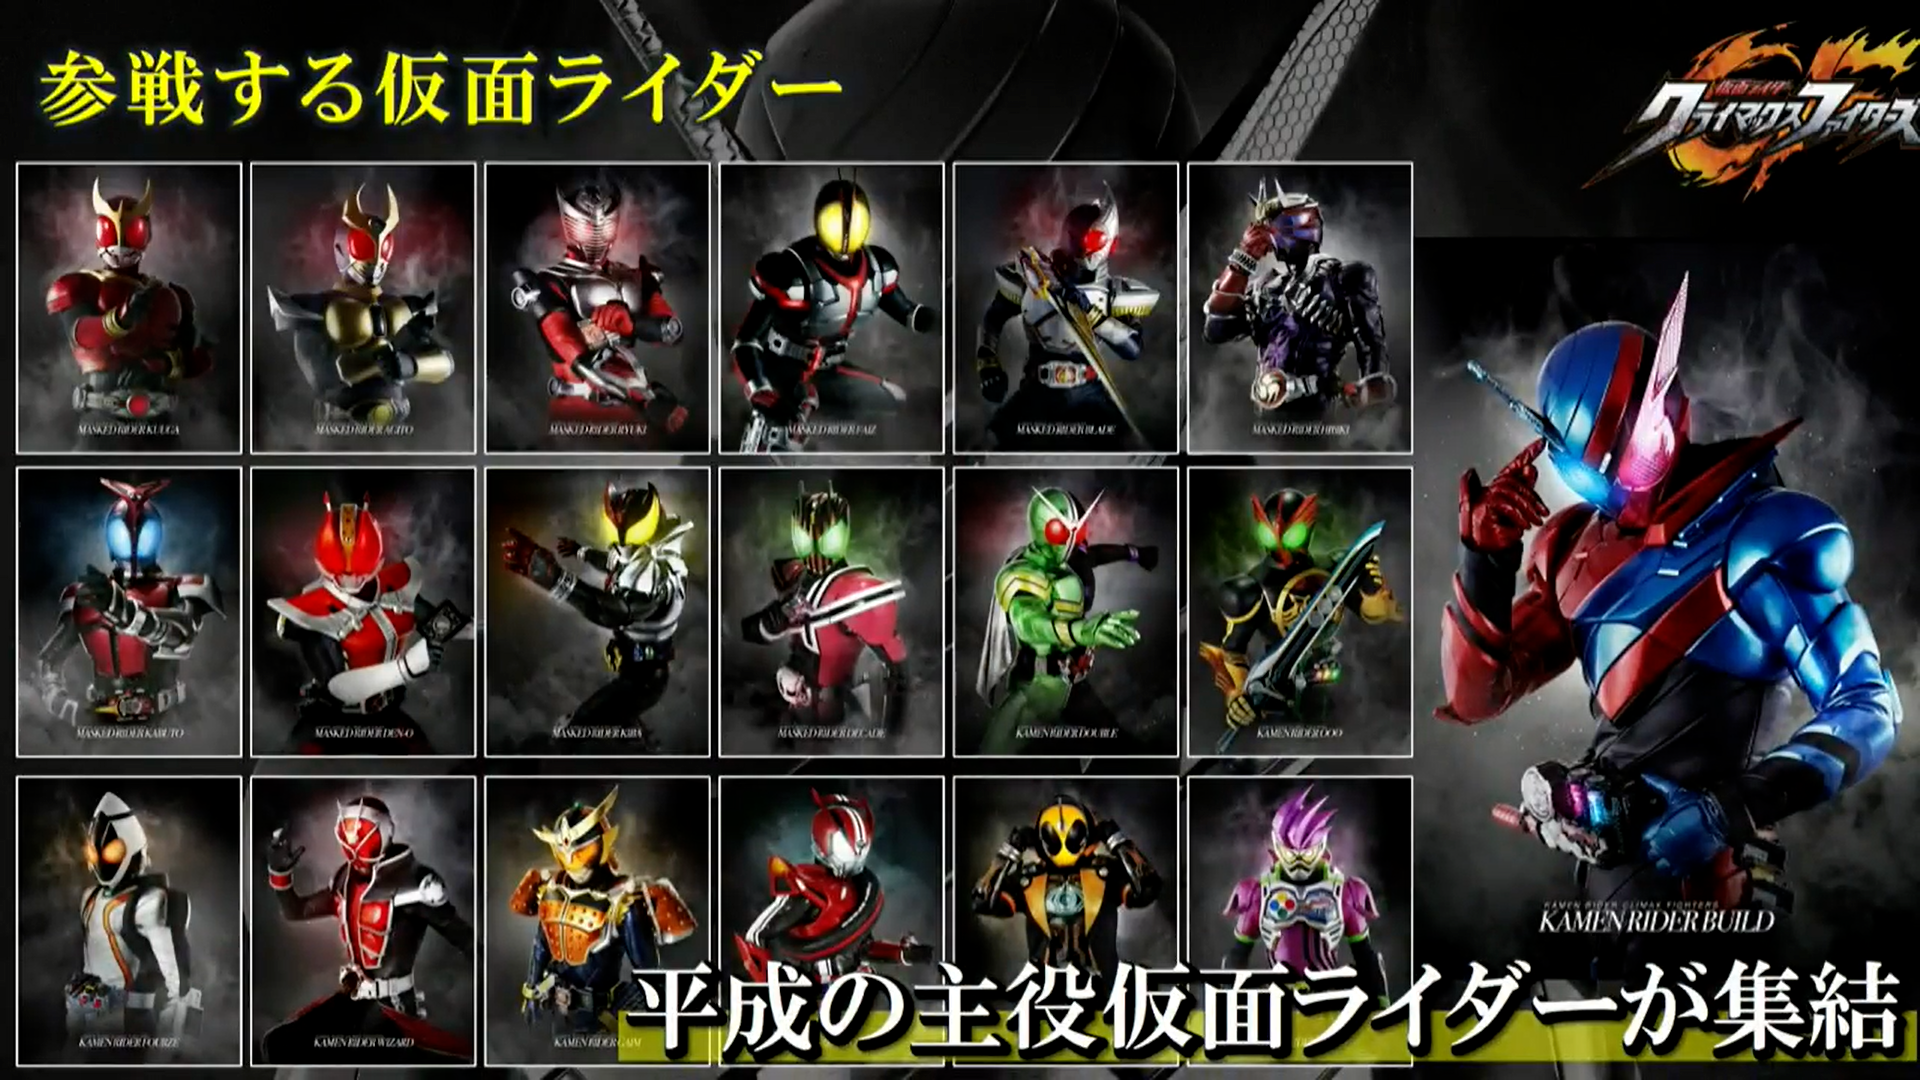 Kamen Rider Climax Fighters English